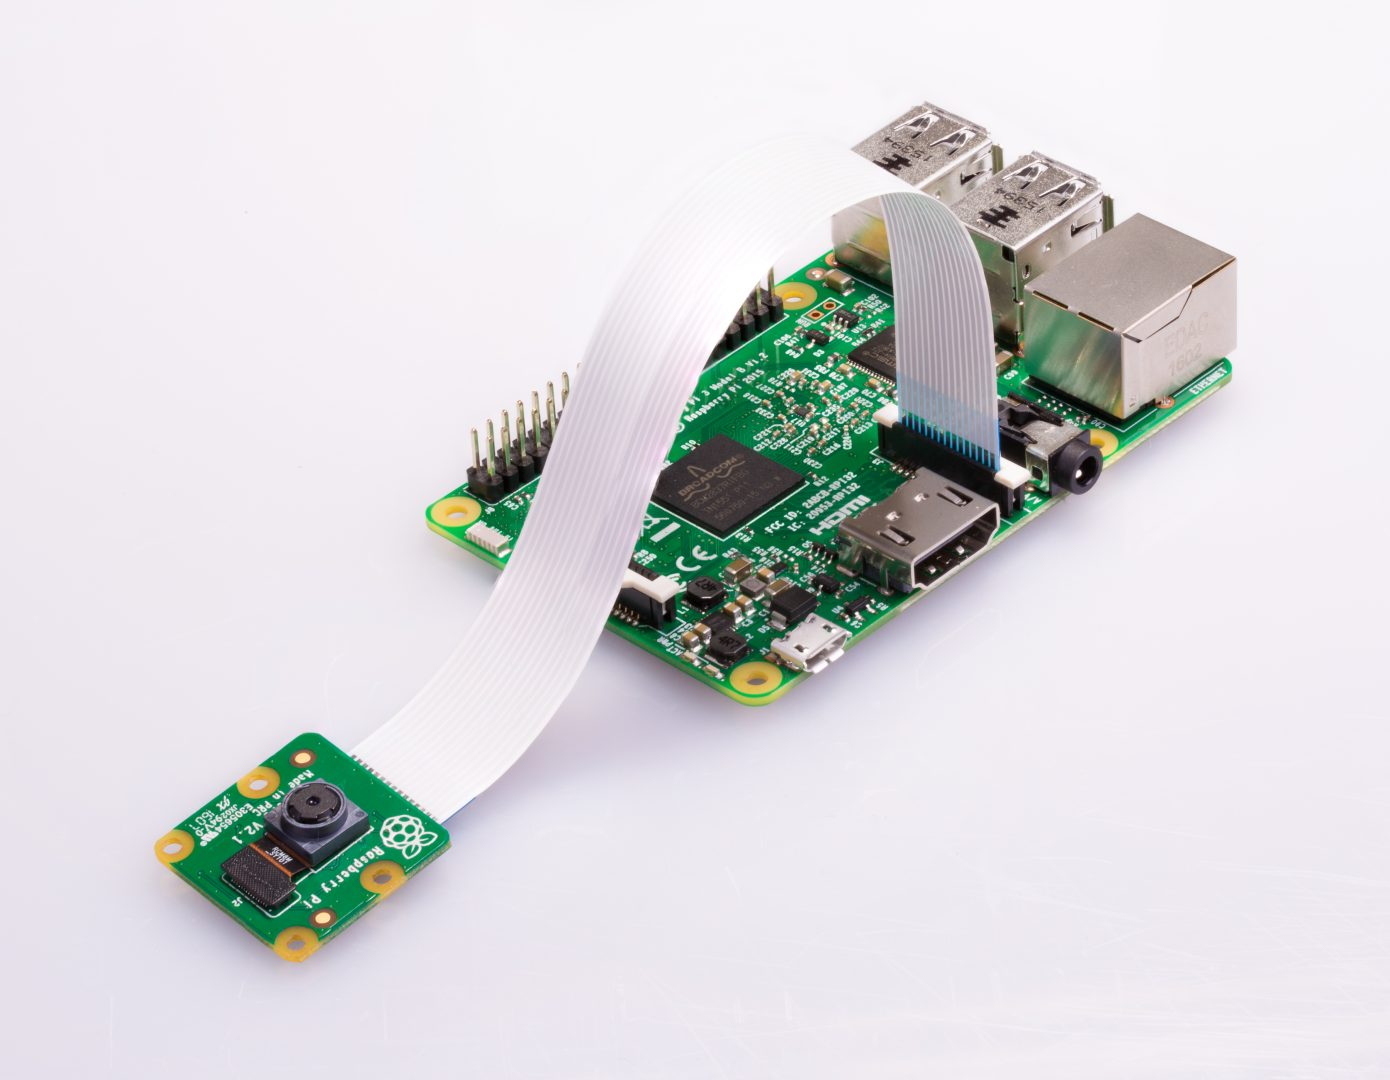 Raspberry Pi with Camera Module attached